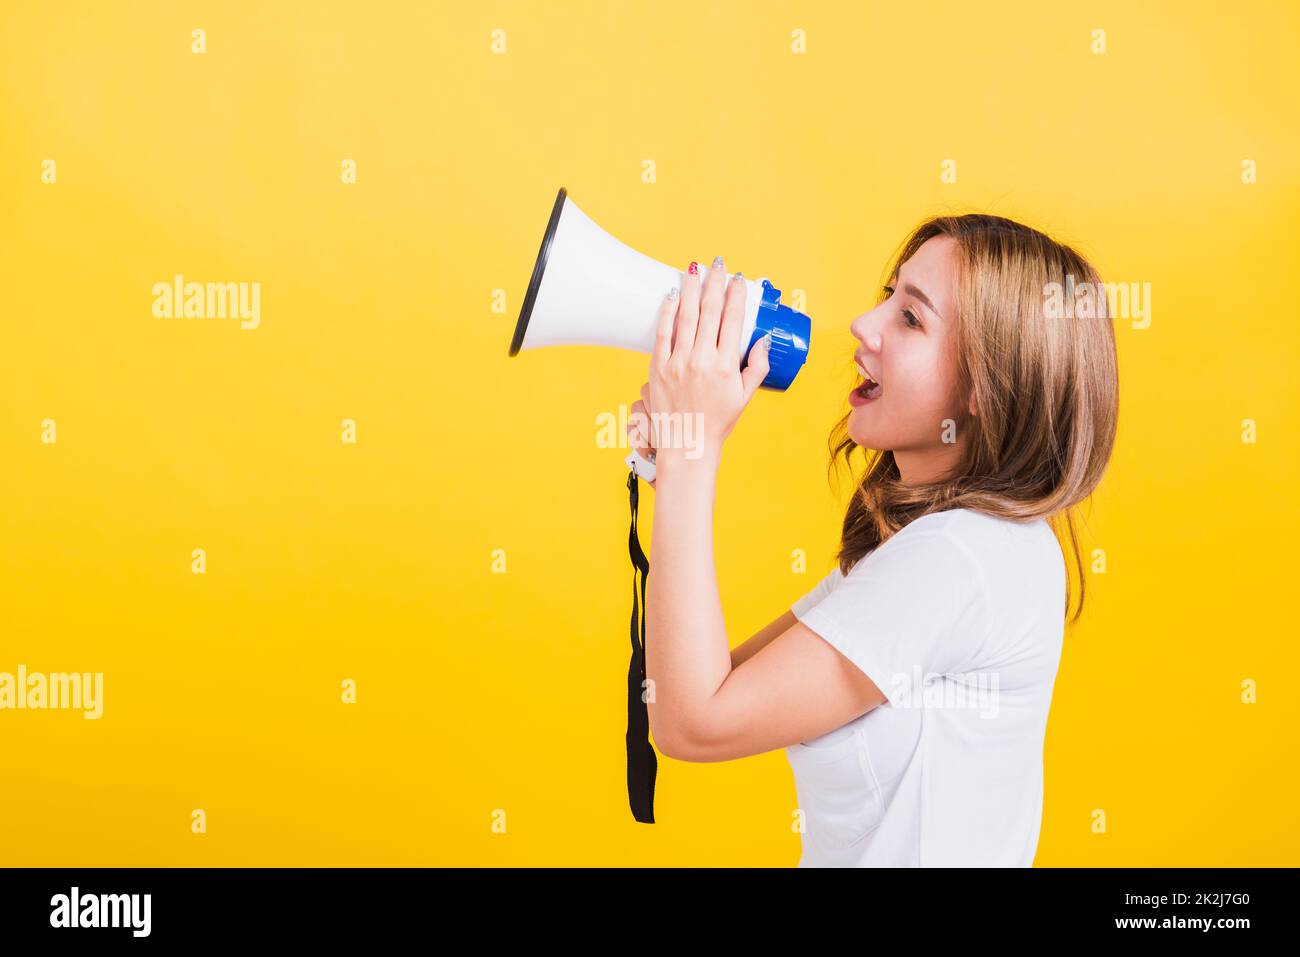 woman teen standing making announcement message shouting screaming in megaphone Stock Photo